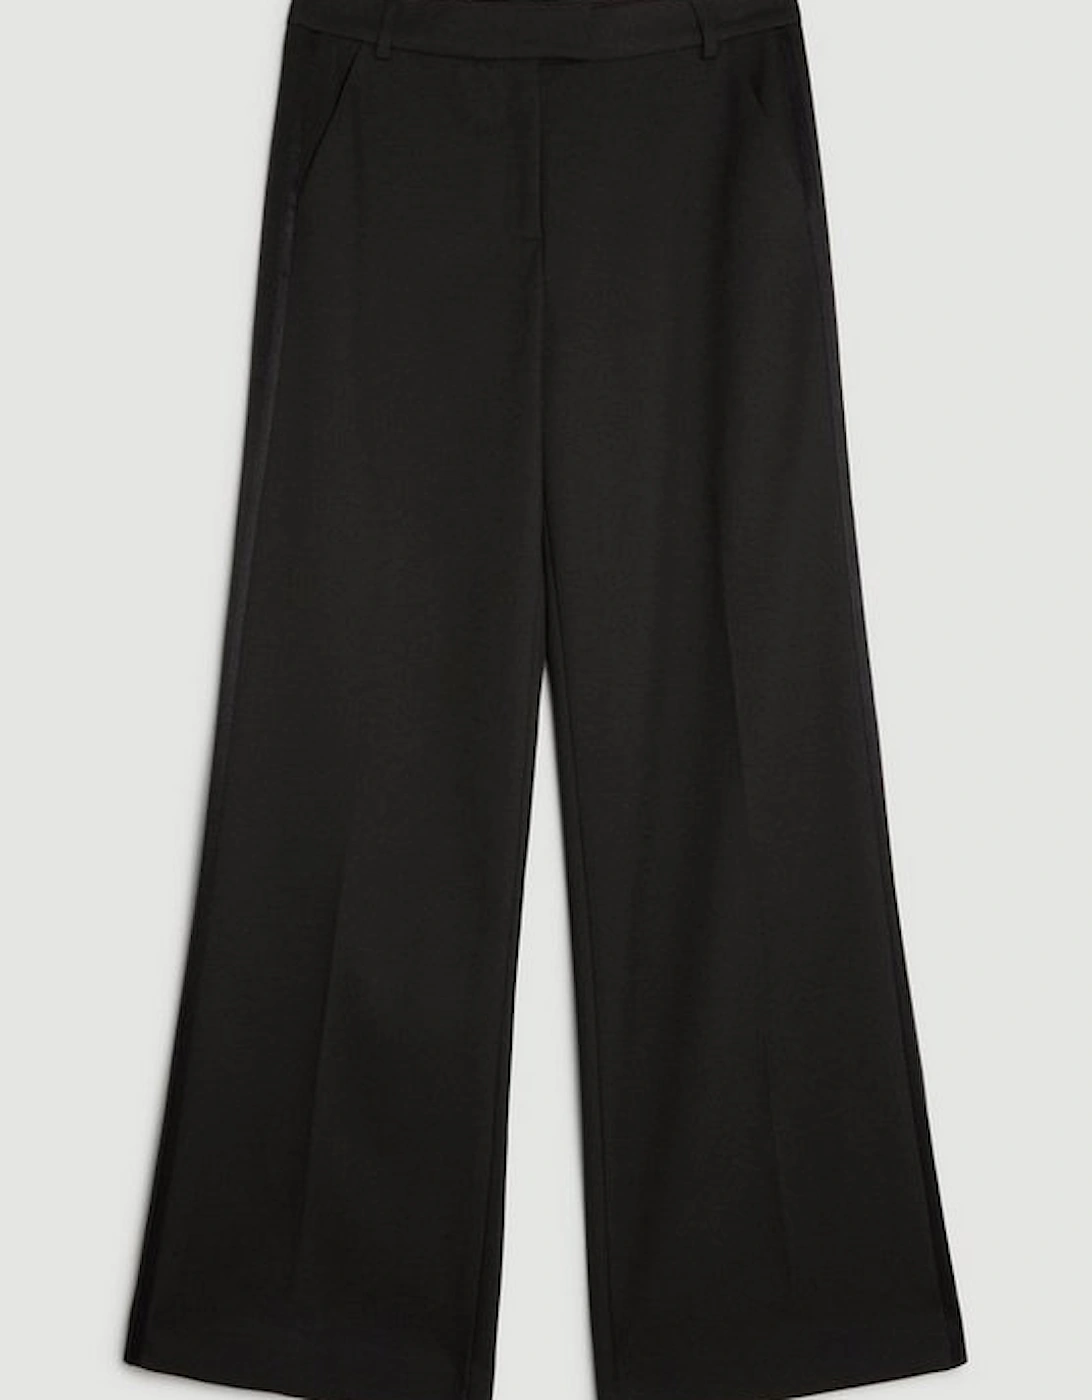 The Founder Premium Twill Straight Leg Tailored Trousers